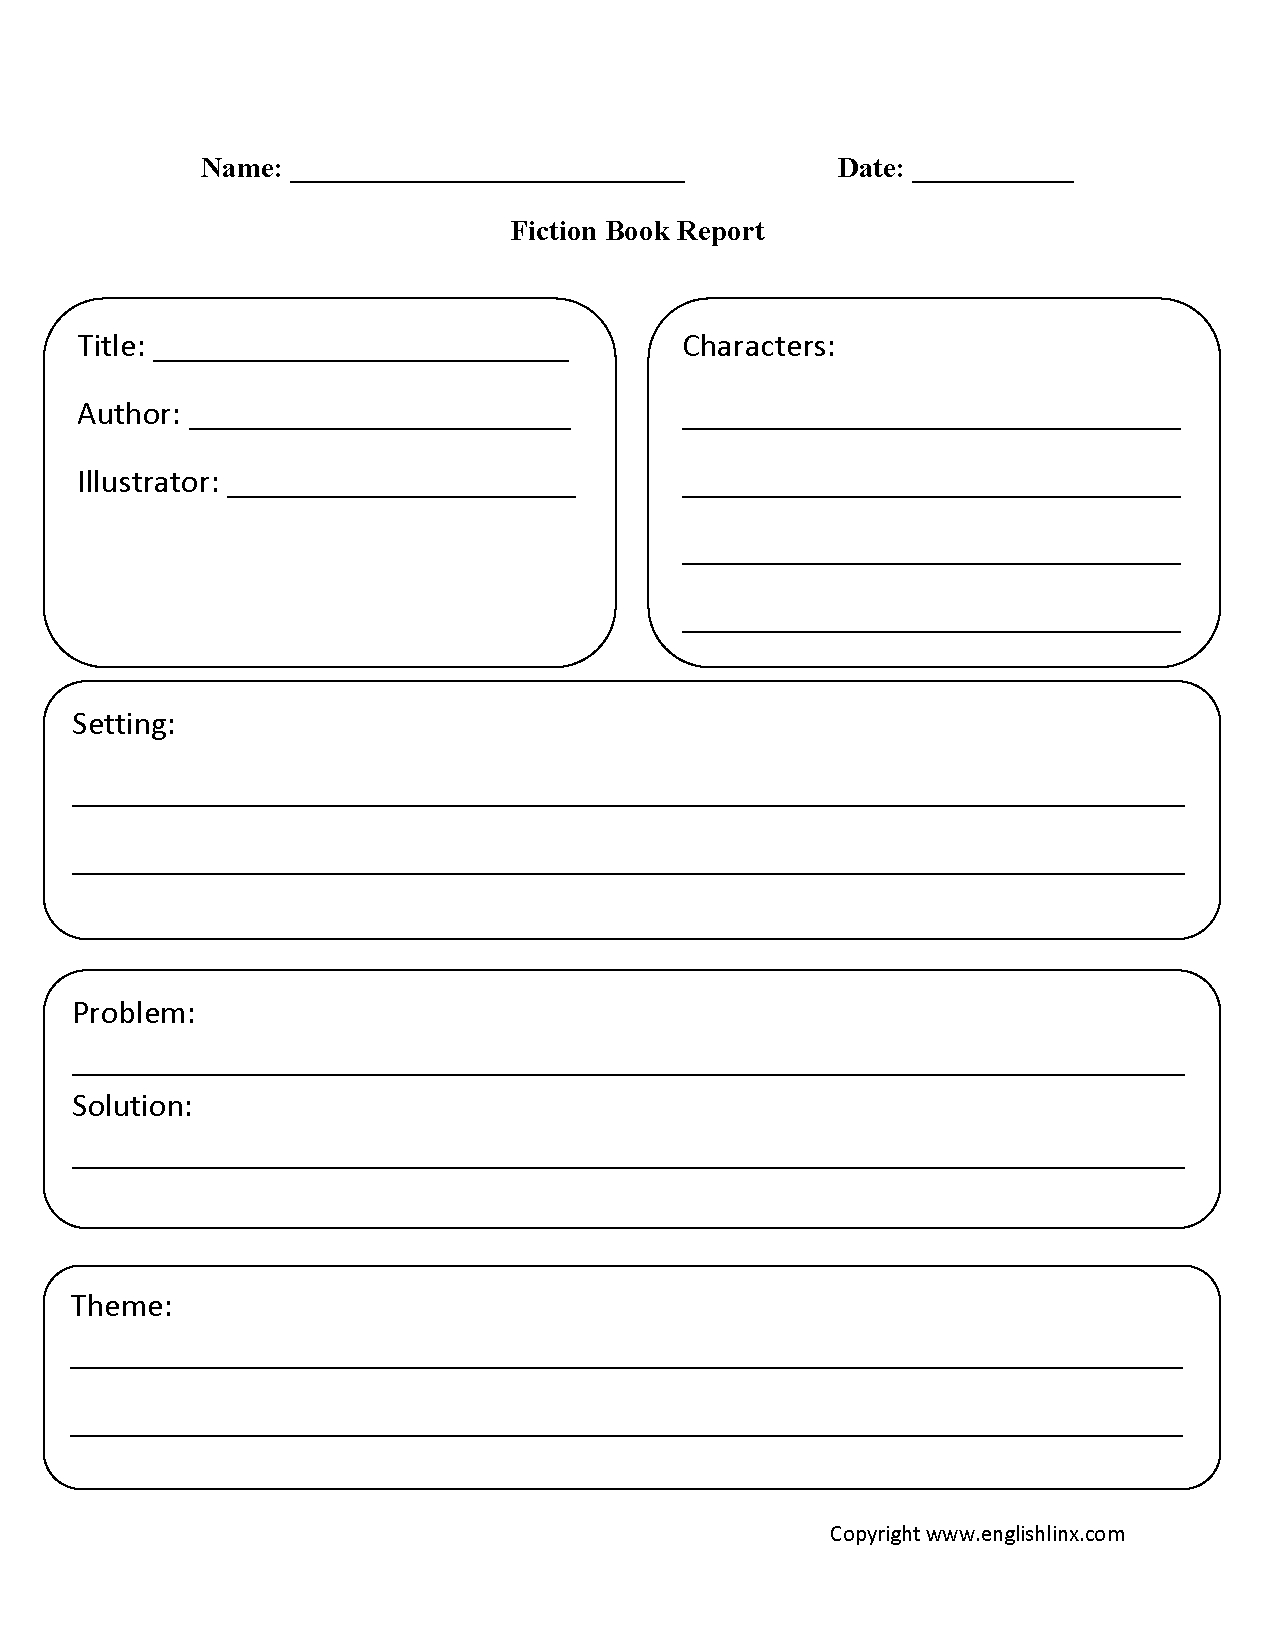 Englishlinx | Book Report Worksheets - Free Printable Book Report Forms For Second Grade